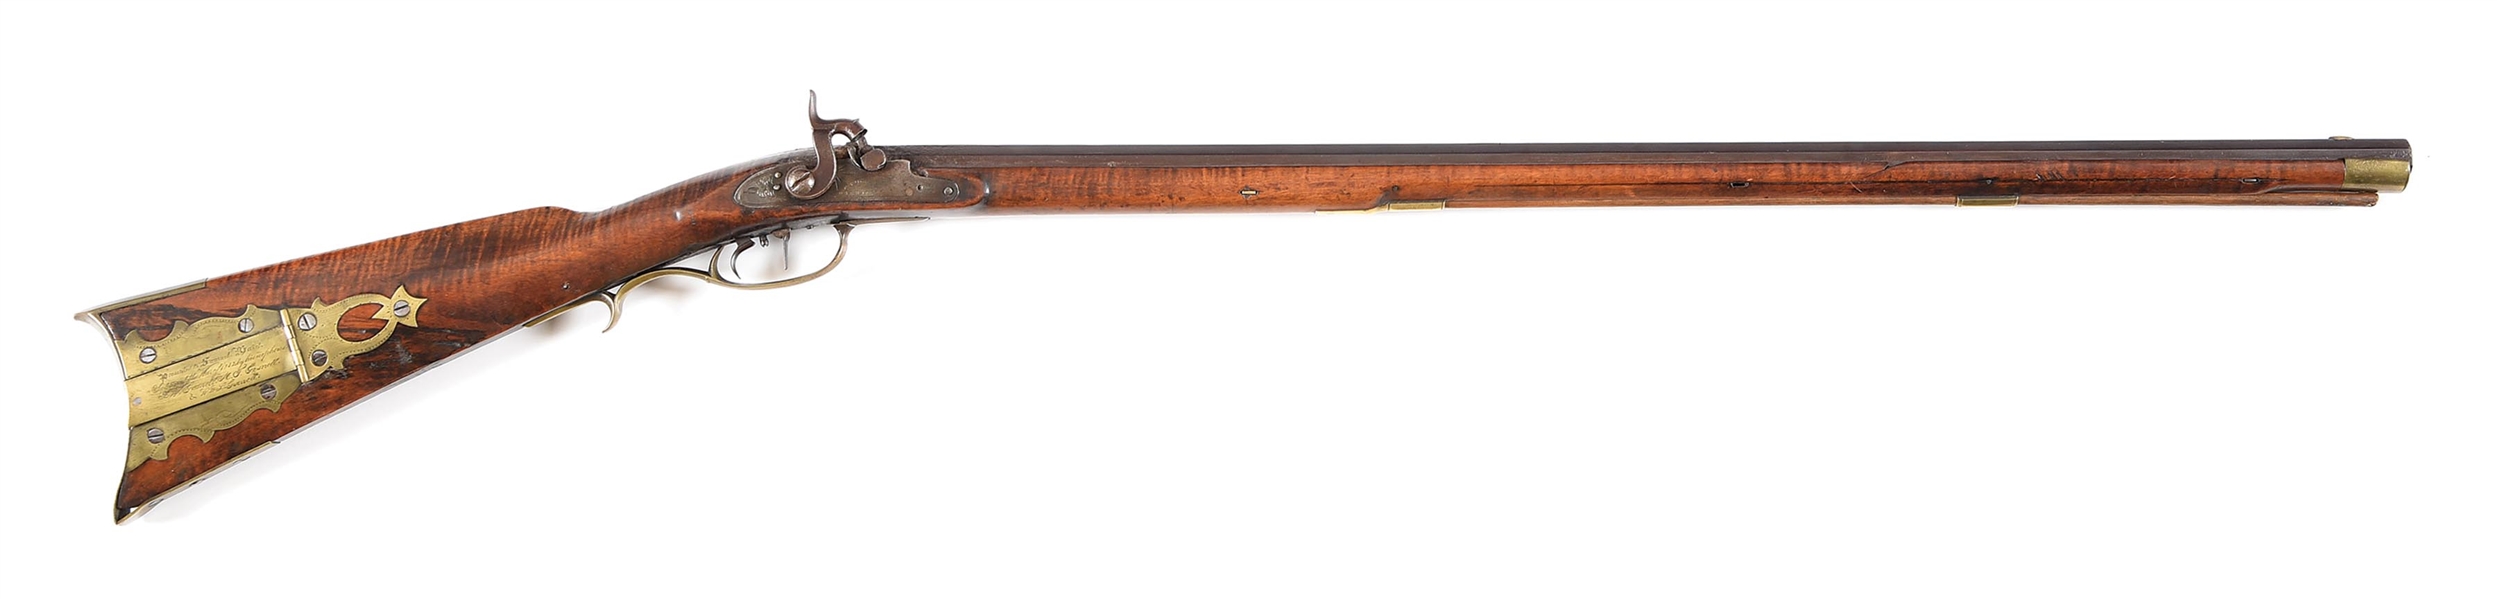 (A) SIGNED WILLIAM EVICK PERCUSSION KENTUCKY RIFLE WITH INSCRIPTION AND PRESENTATON FROM THE BATTLE OF ANTIETAM.